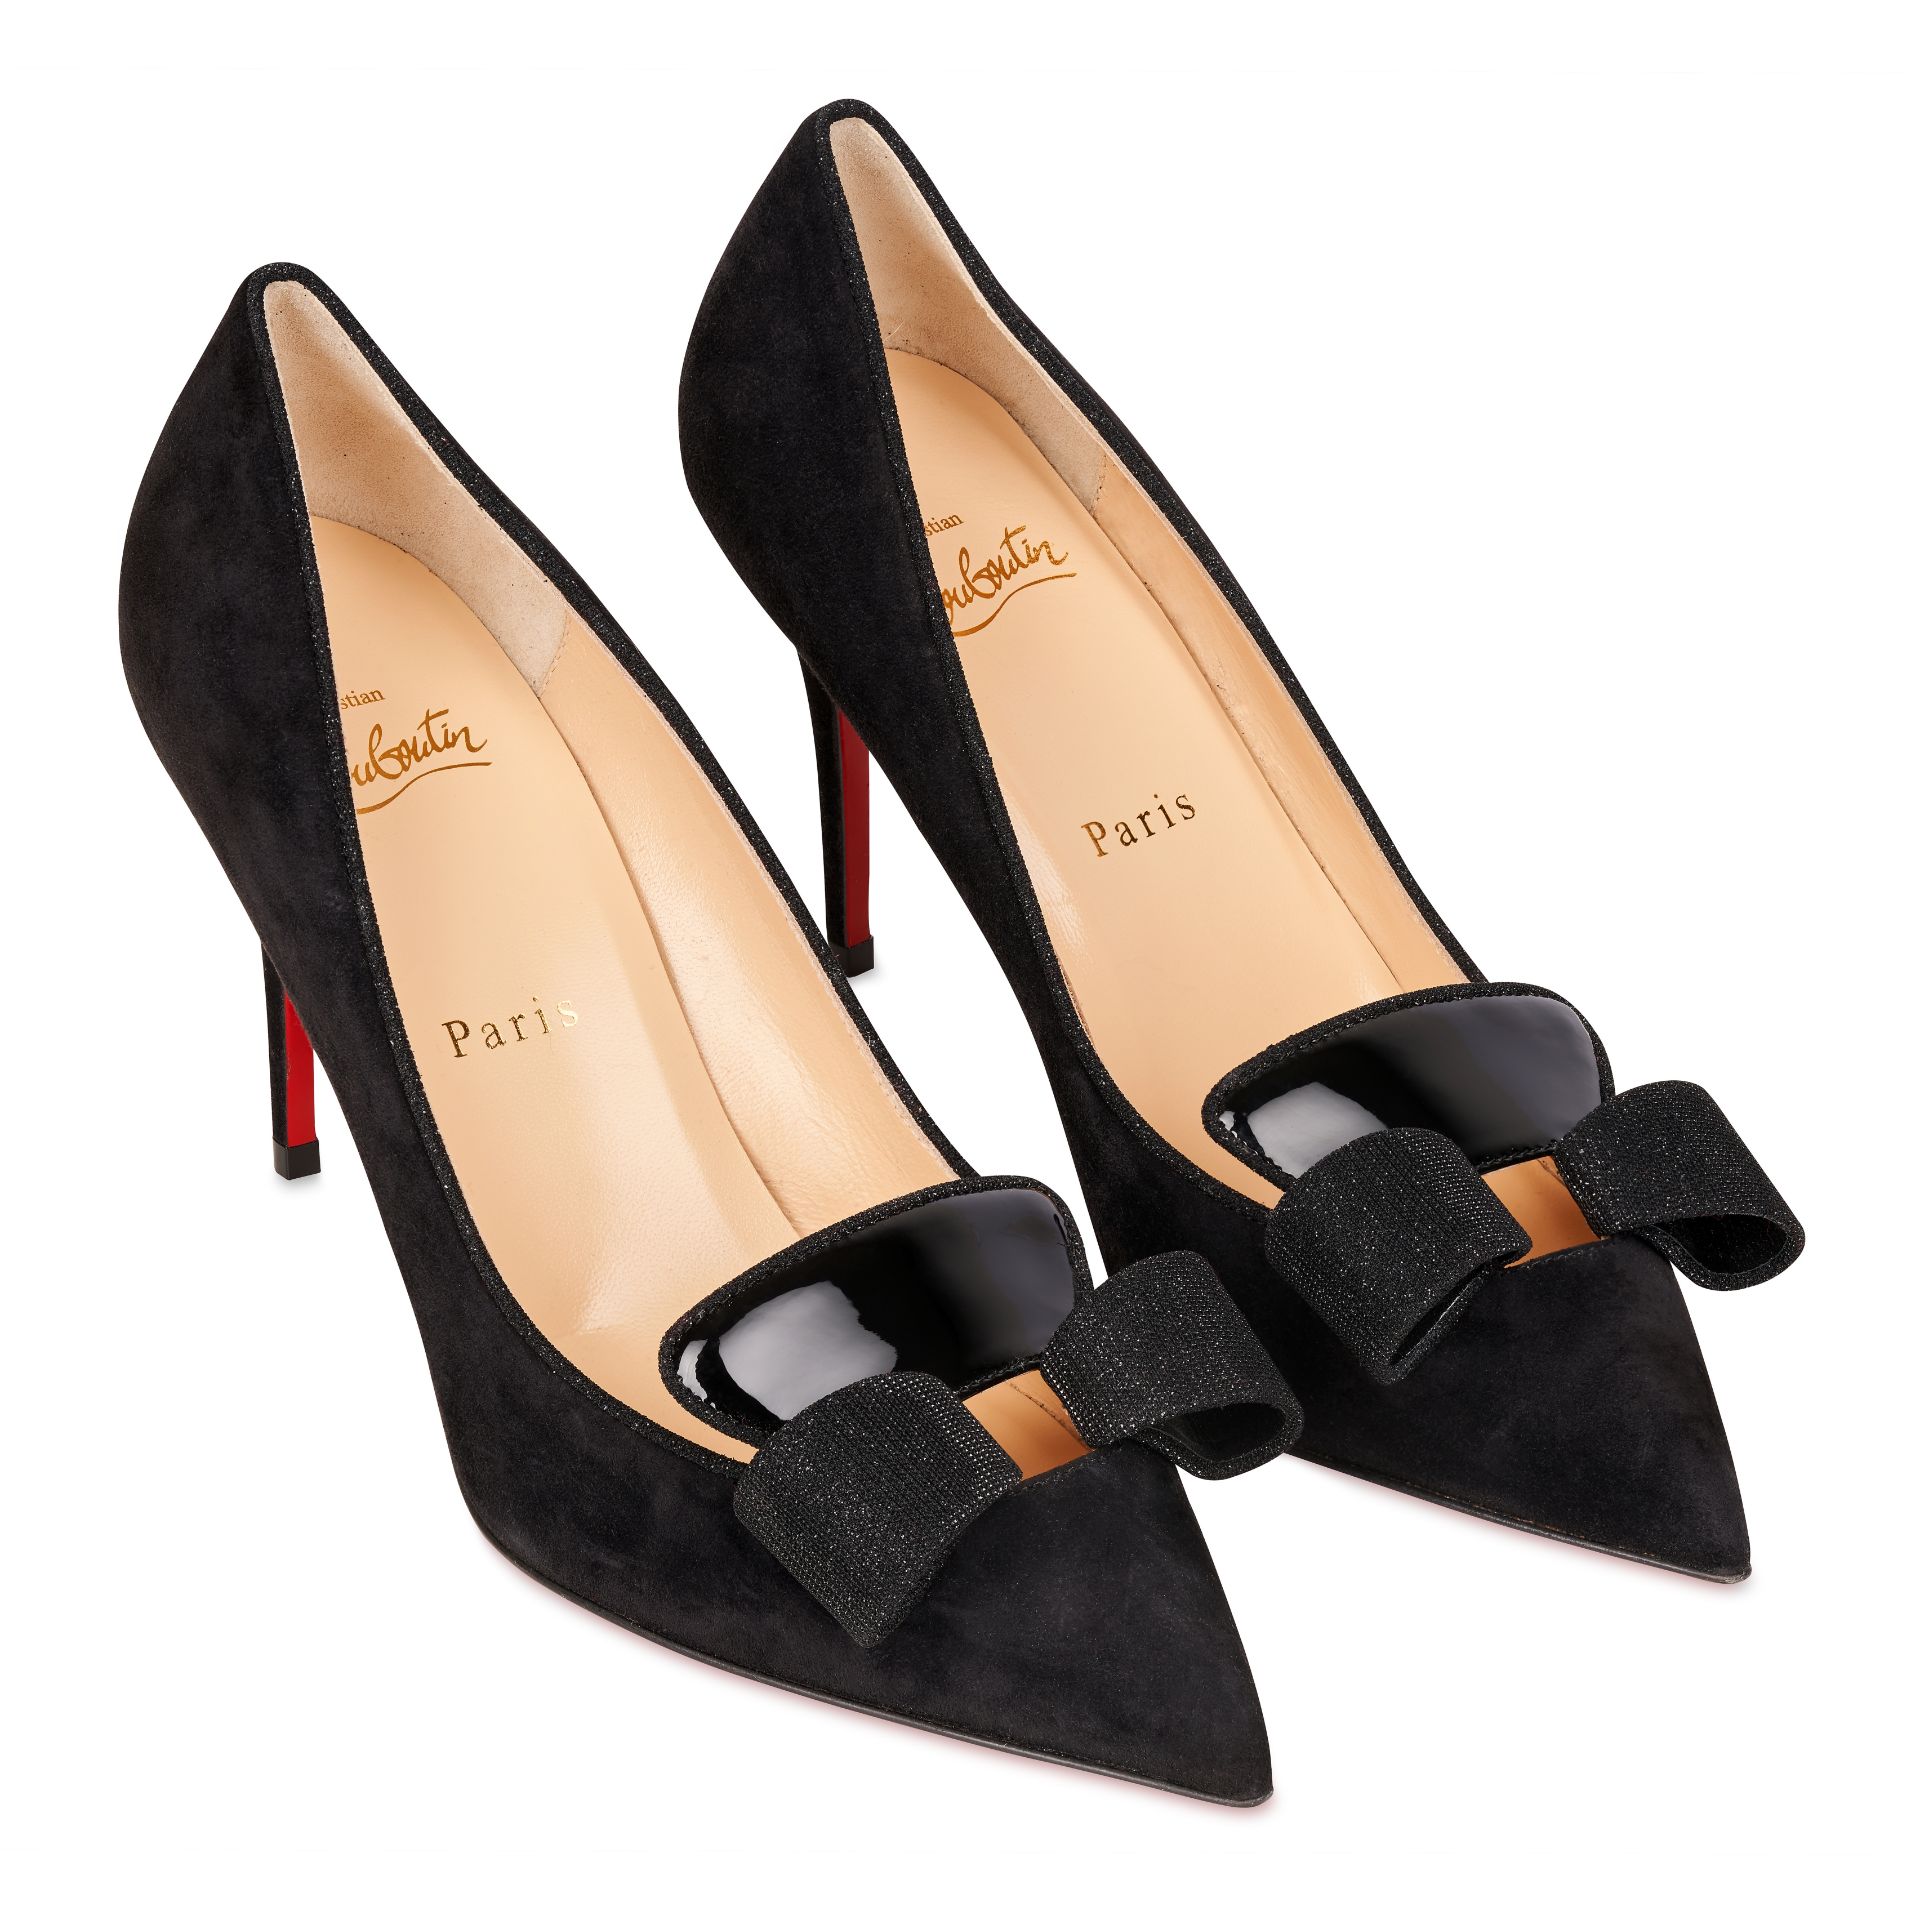 CHRISTIAN LOUBOUTIN BOW HEELS Condition grade A-. Size 38. Heel height 9cm. Black suede with cu...